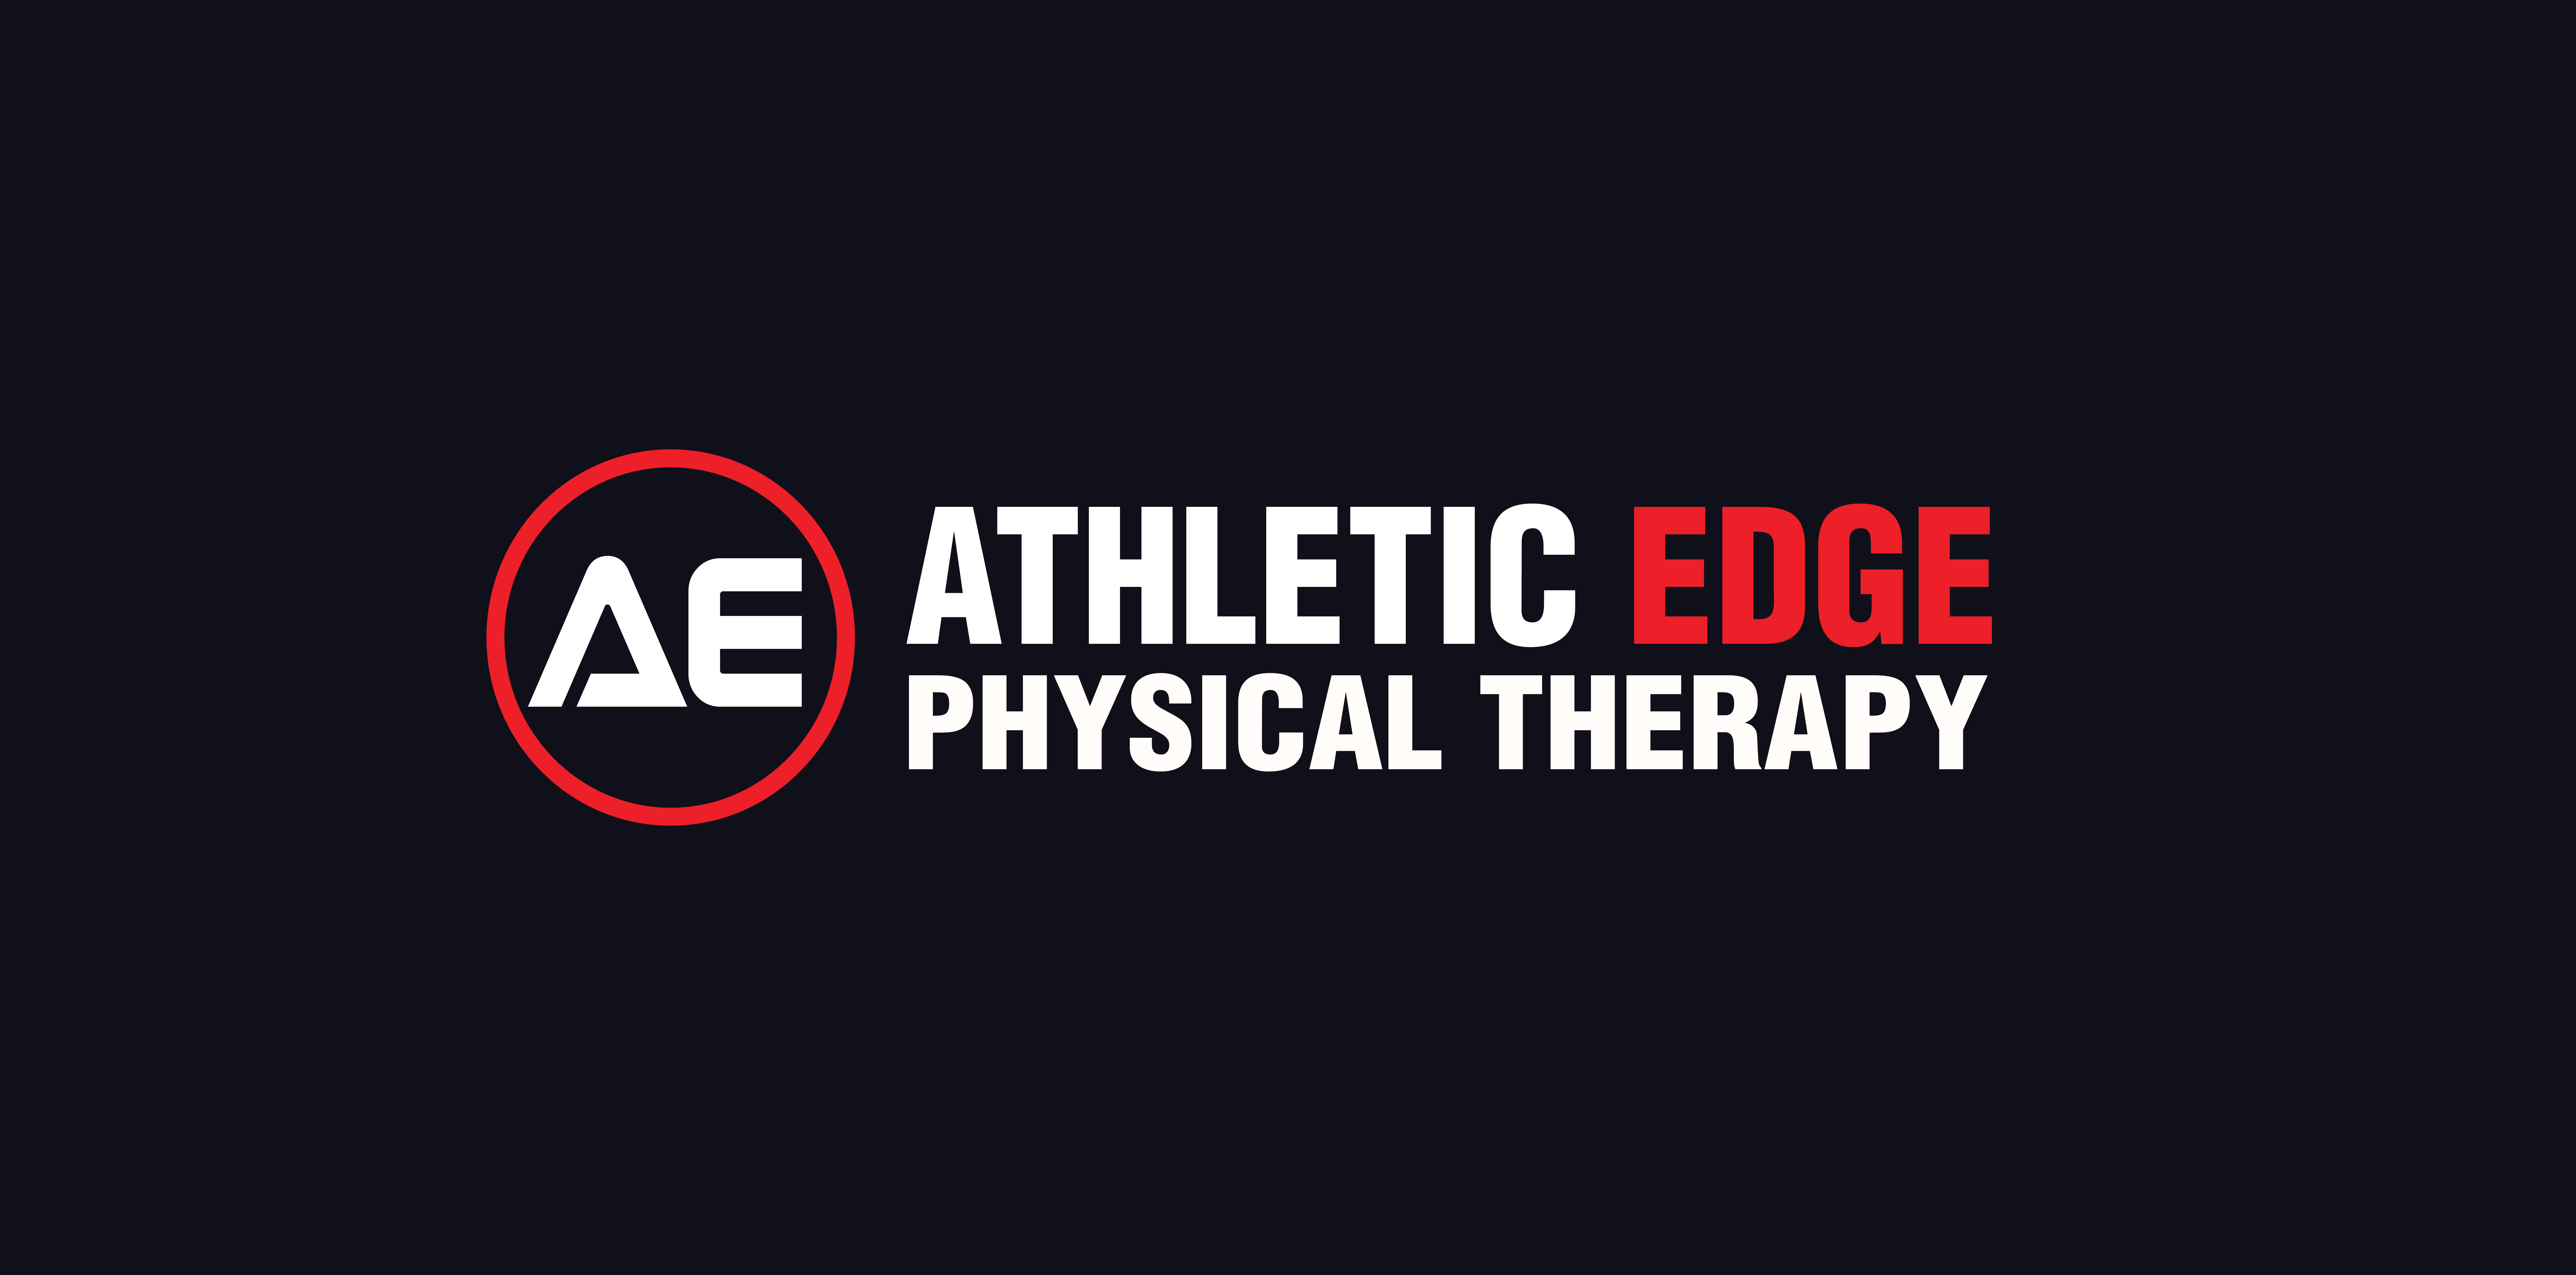 Athletic Edge Physical Therapy Announces Today the Grand Opening of its ...